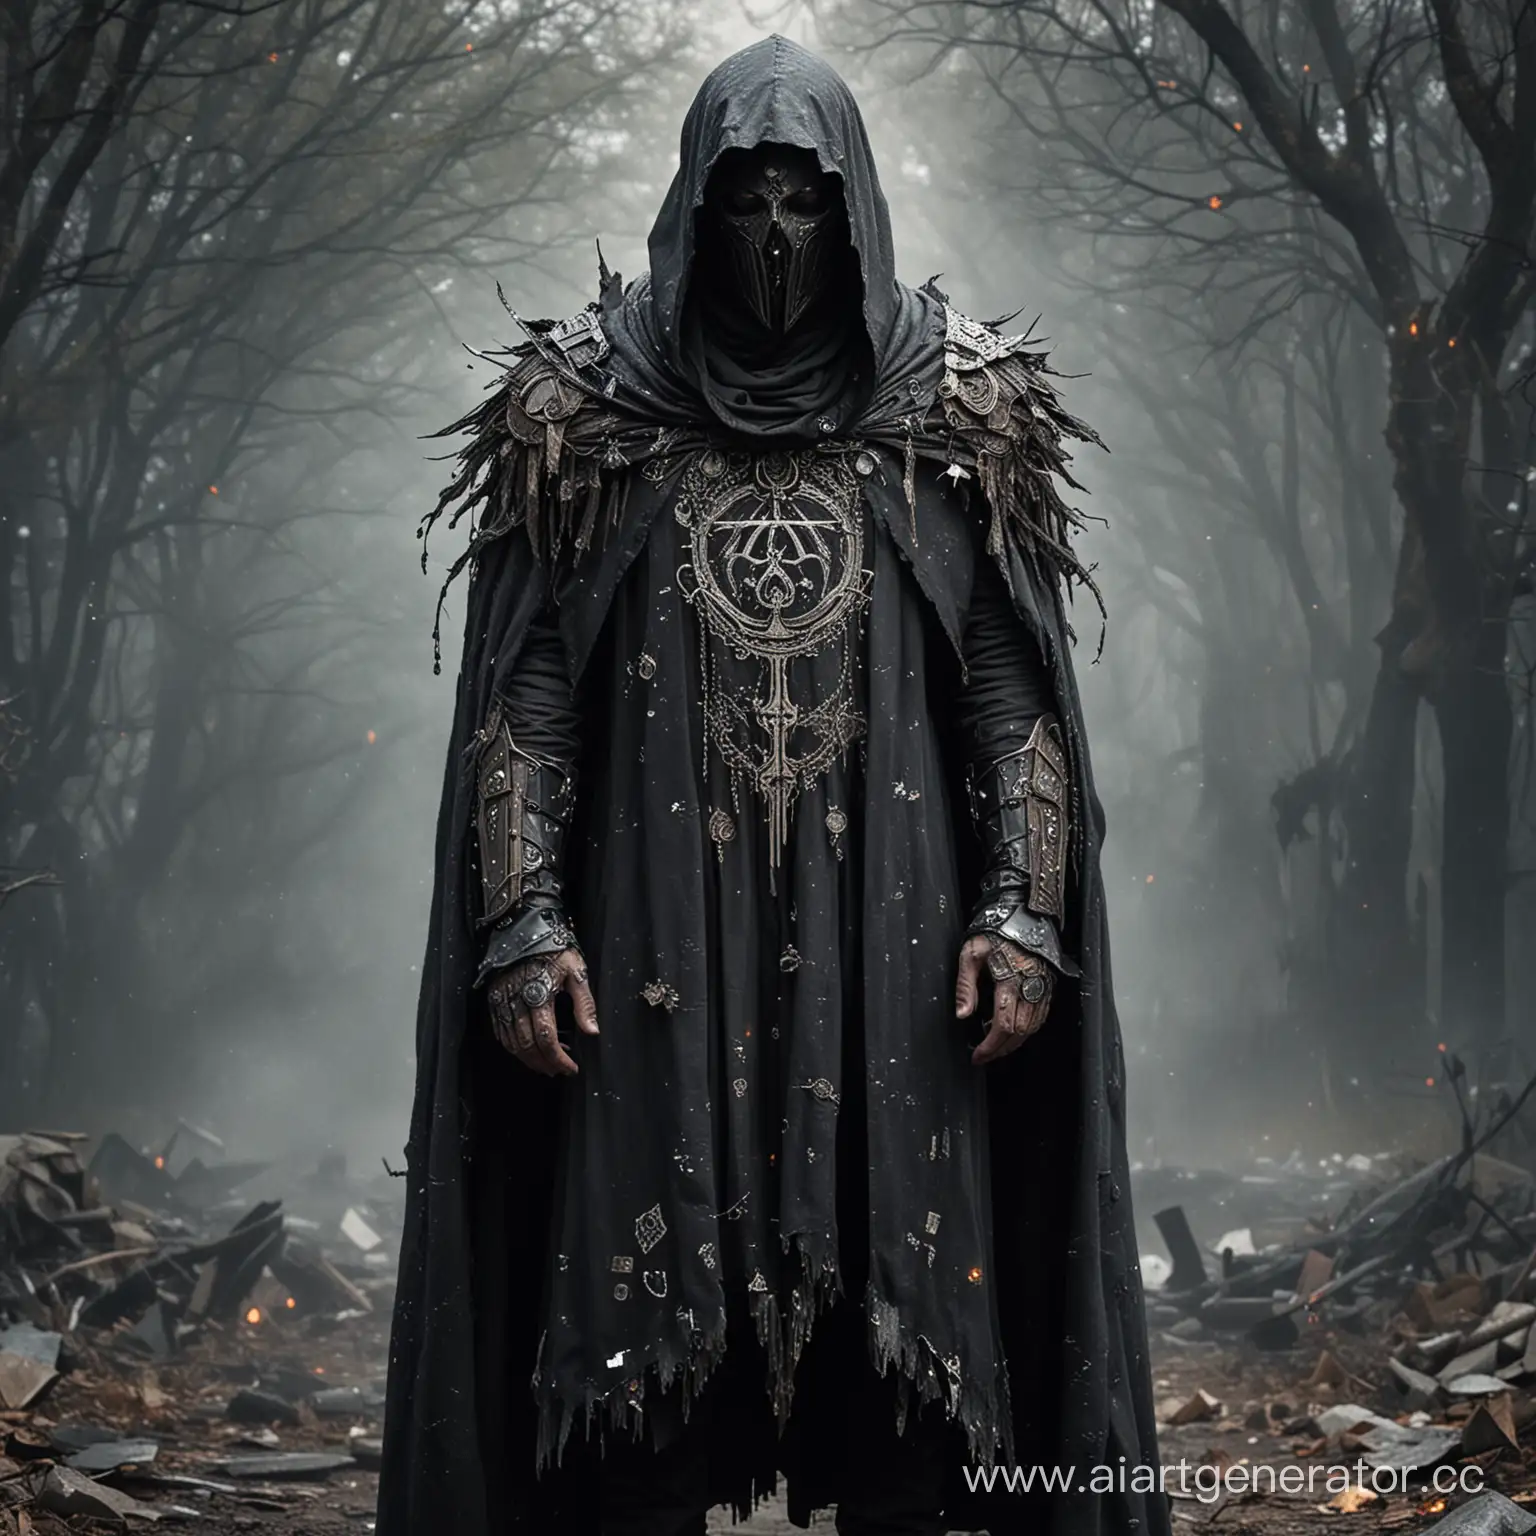 Entropy Emperor: Accelerates entropy and decay, causing chaos and destruction wherever they go. Costume: Tattered cloak adorned with decaying symbols, emanating an aura of entropy that corrodes nearby objects. Make it cinematic 